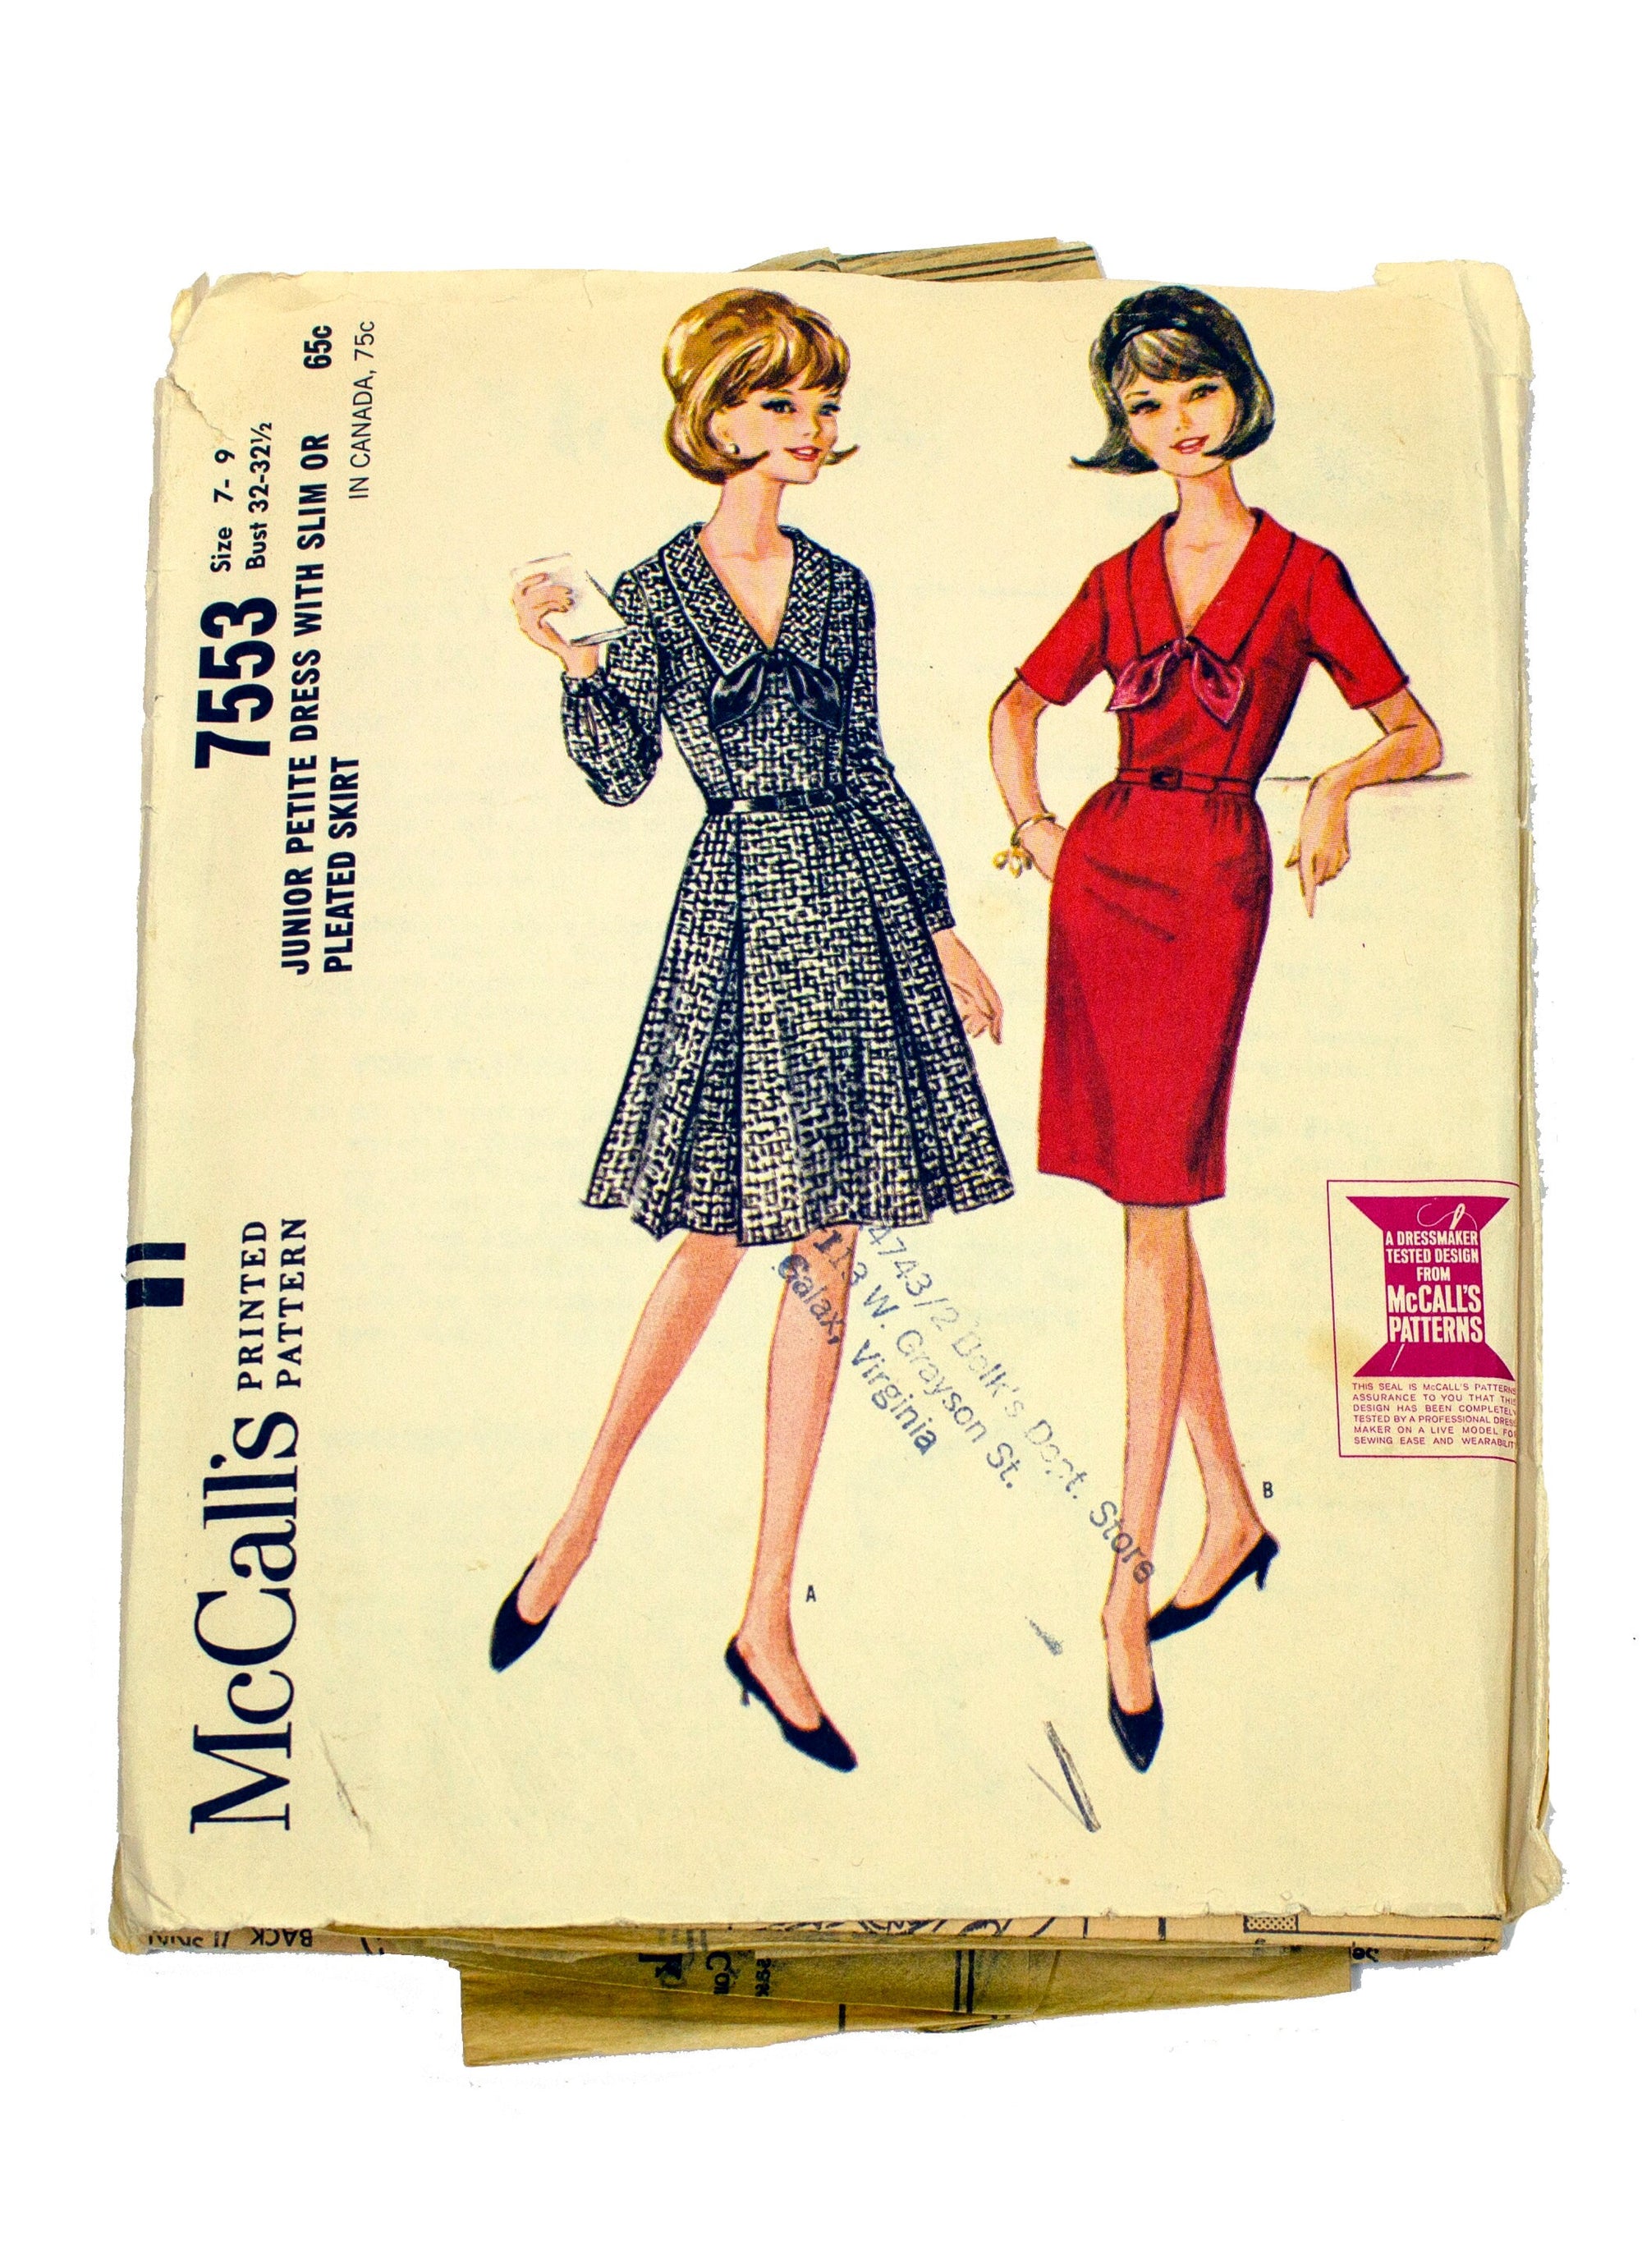 McCall's 7553 Women's Dress with Slim or Pleated Skirt - Sizes 7 - 9 Bust 32 - 32 1/2